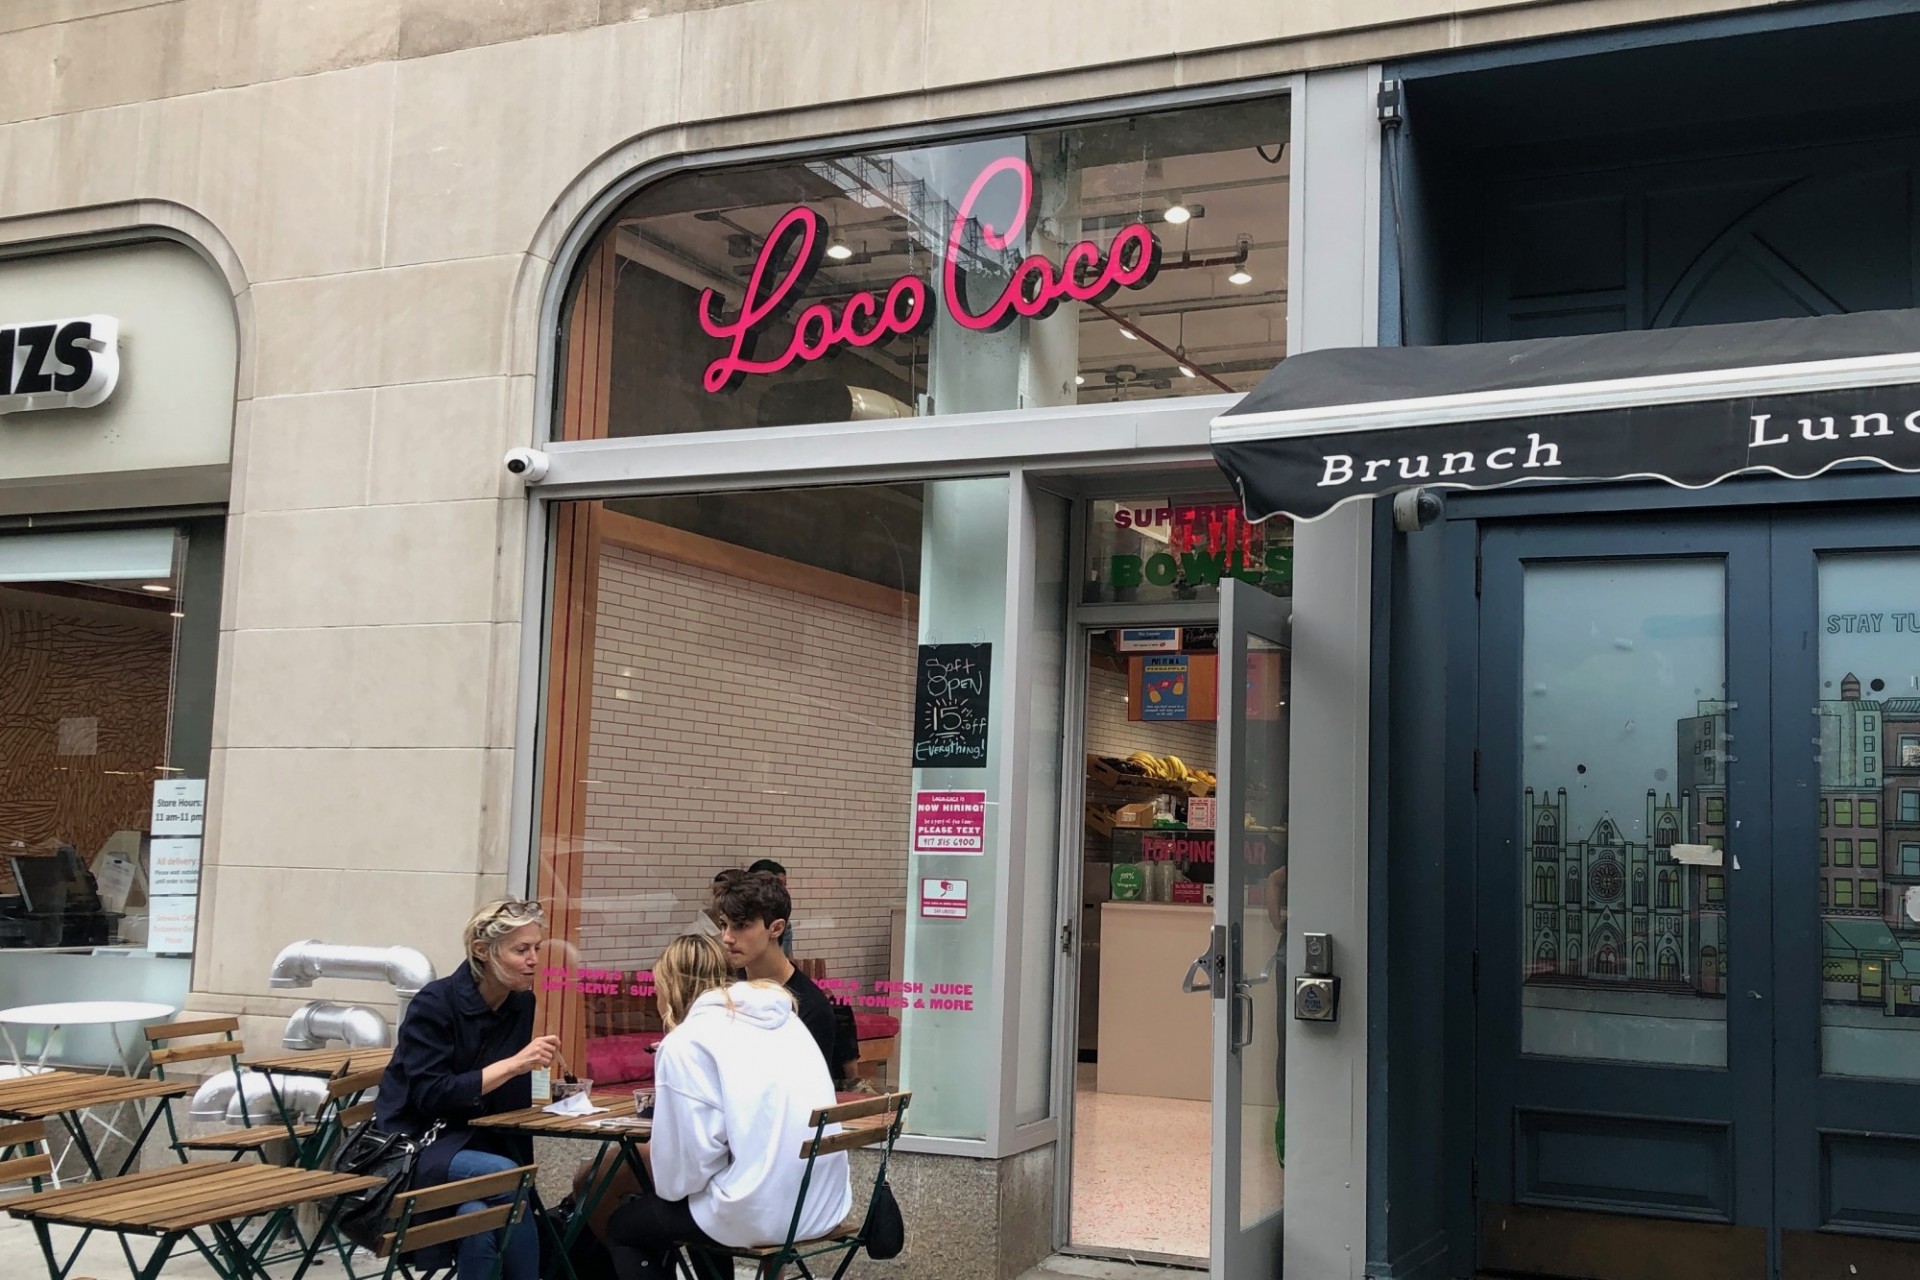 Columbia Brings Family-owned Ice Cream Shop to Morningside Heights